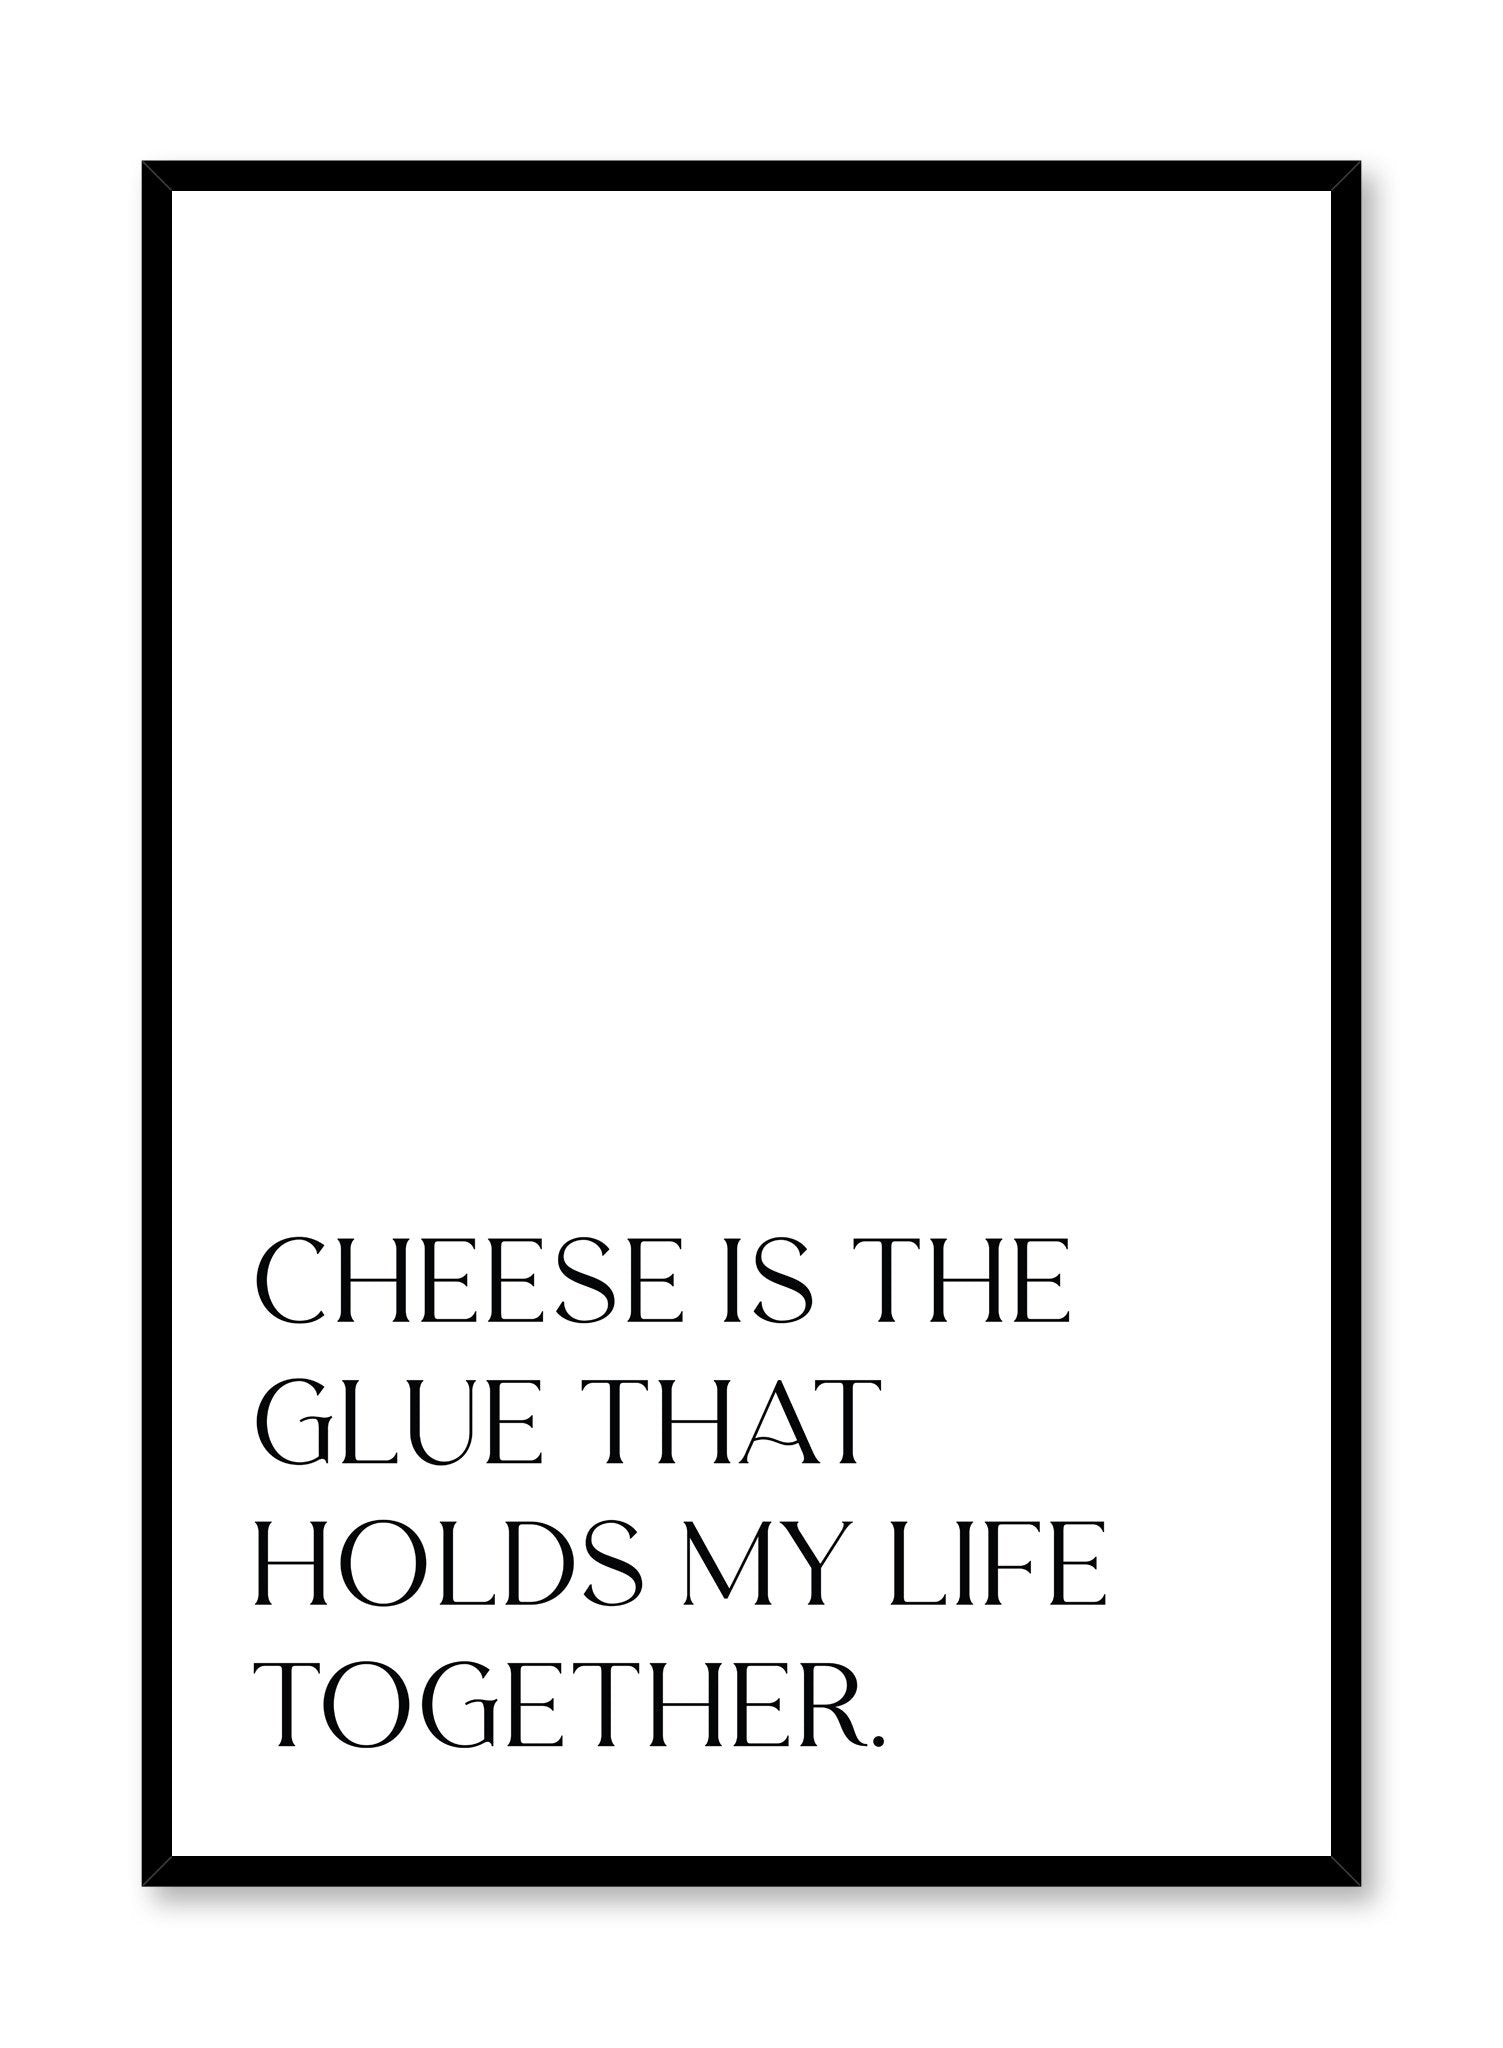 Cheesy Love is a cheese themed and humorous typography poster by Opposite Wall.